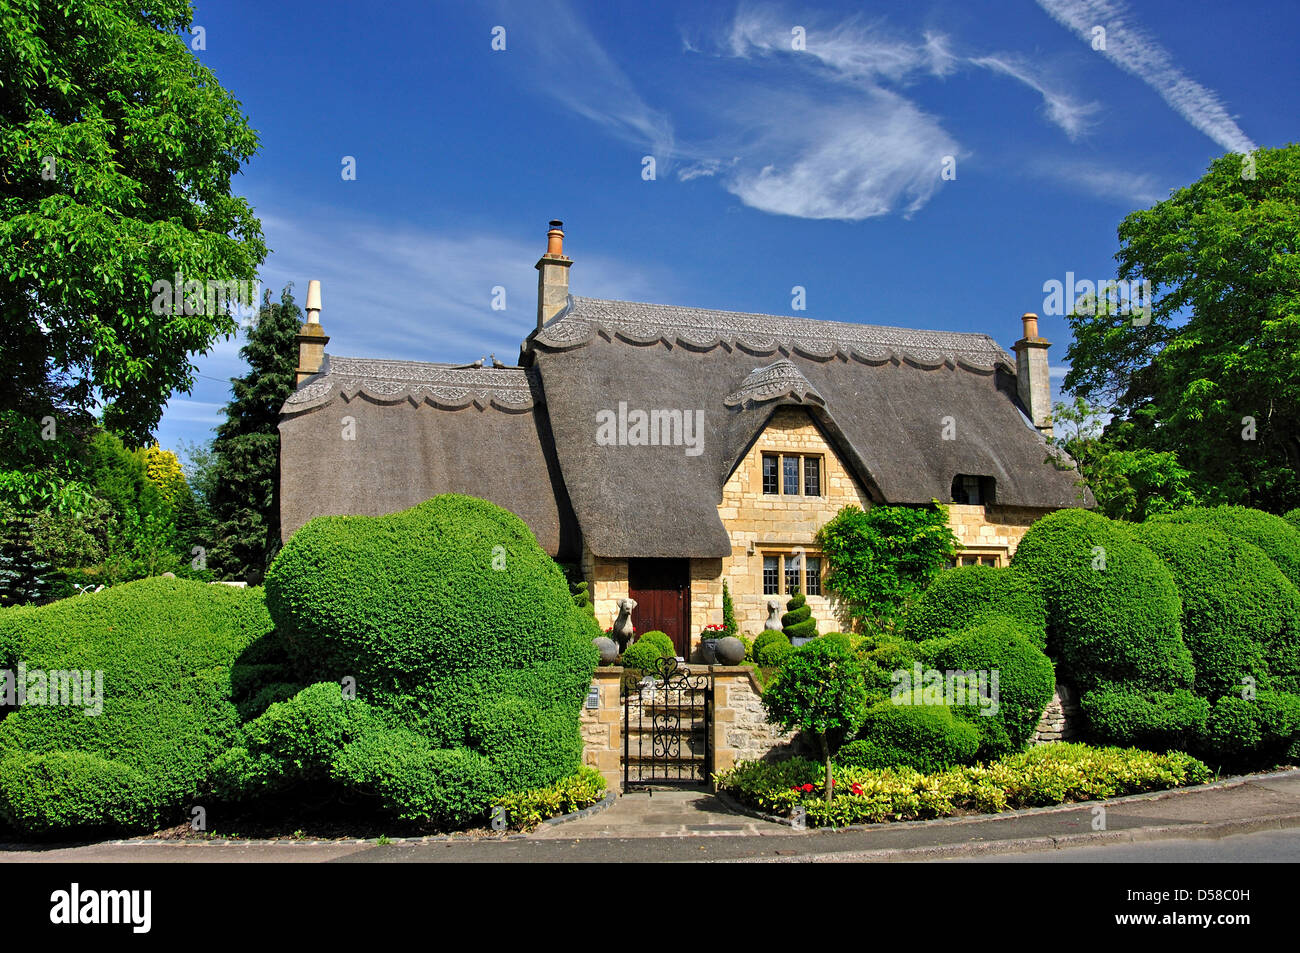 Chaumière, Chipping Campden, Cotswolds, Gloucestershire, Angleterre, Royaume-Uni Banque D'Images